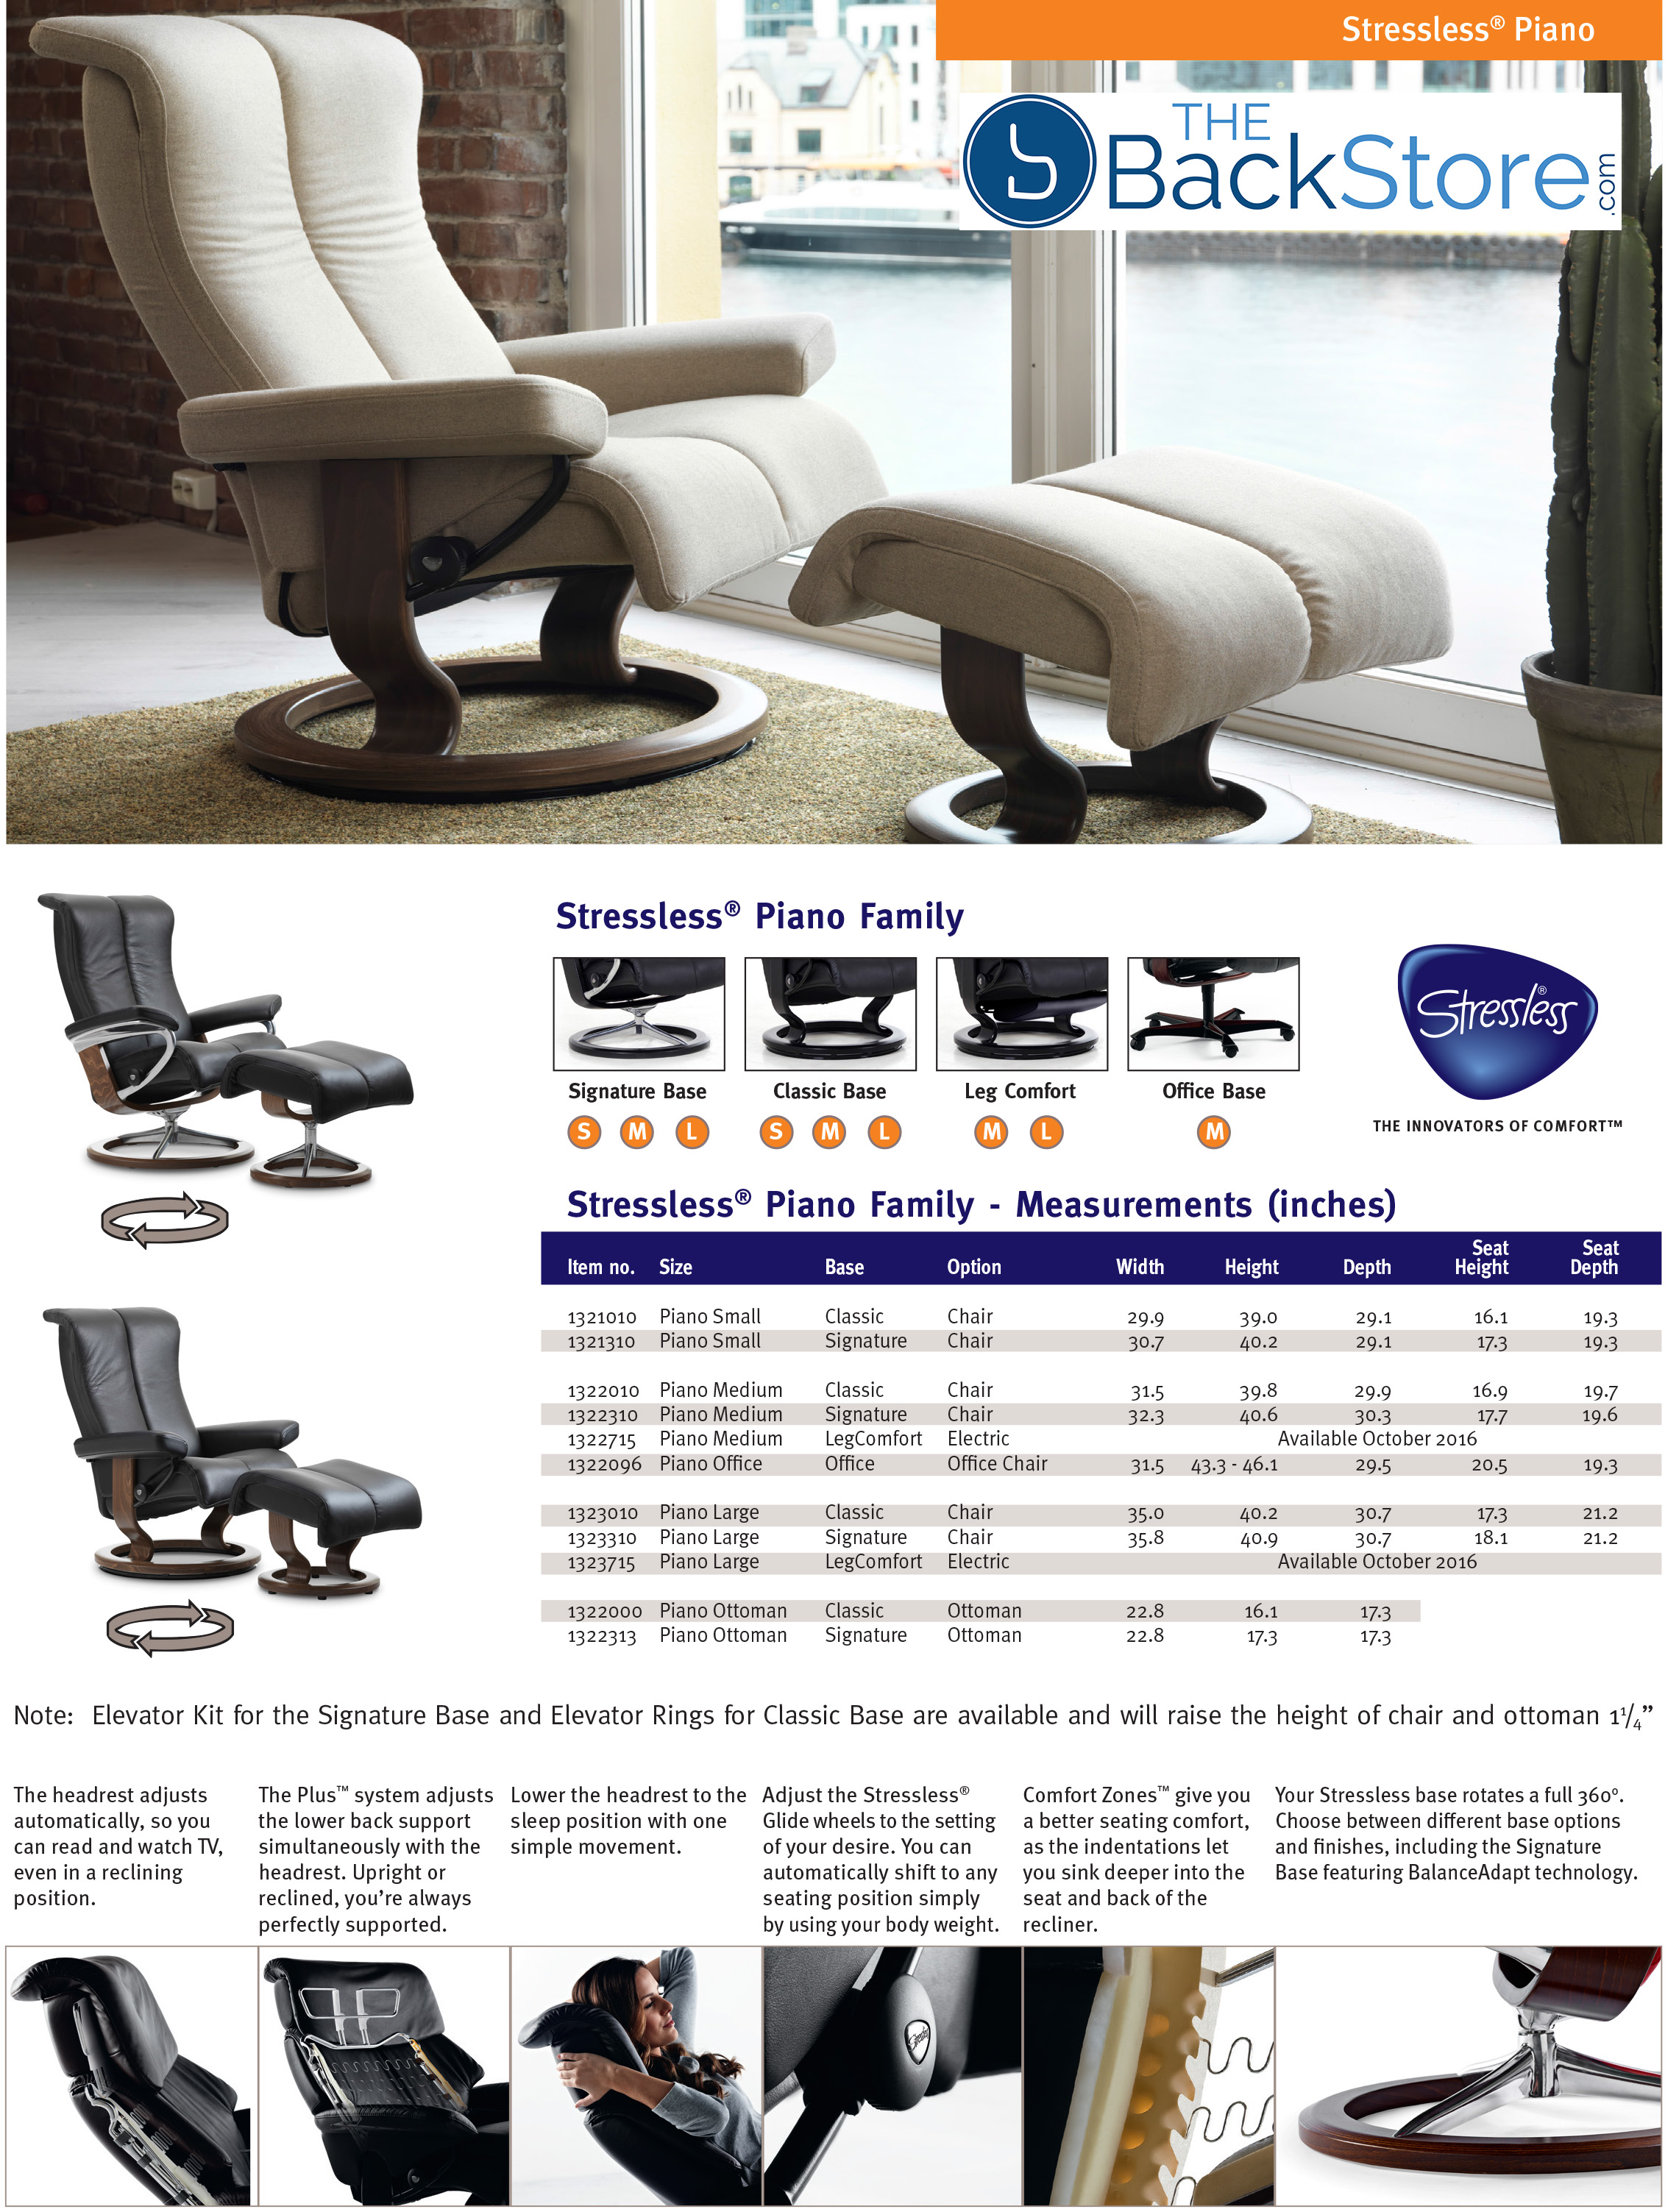 https://vitalityweb.com/Stressless-Chair/stressless_images/Stressless_Piano_Recliner_Chair_Product_Sheet_Measurements.jpg